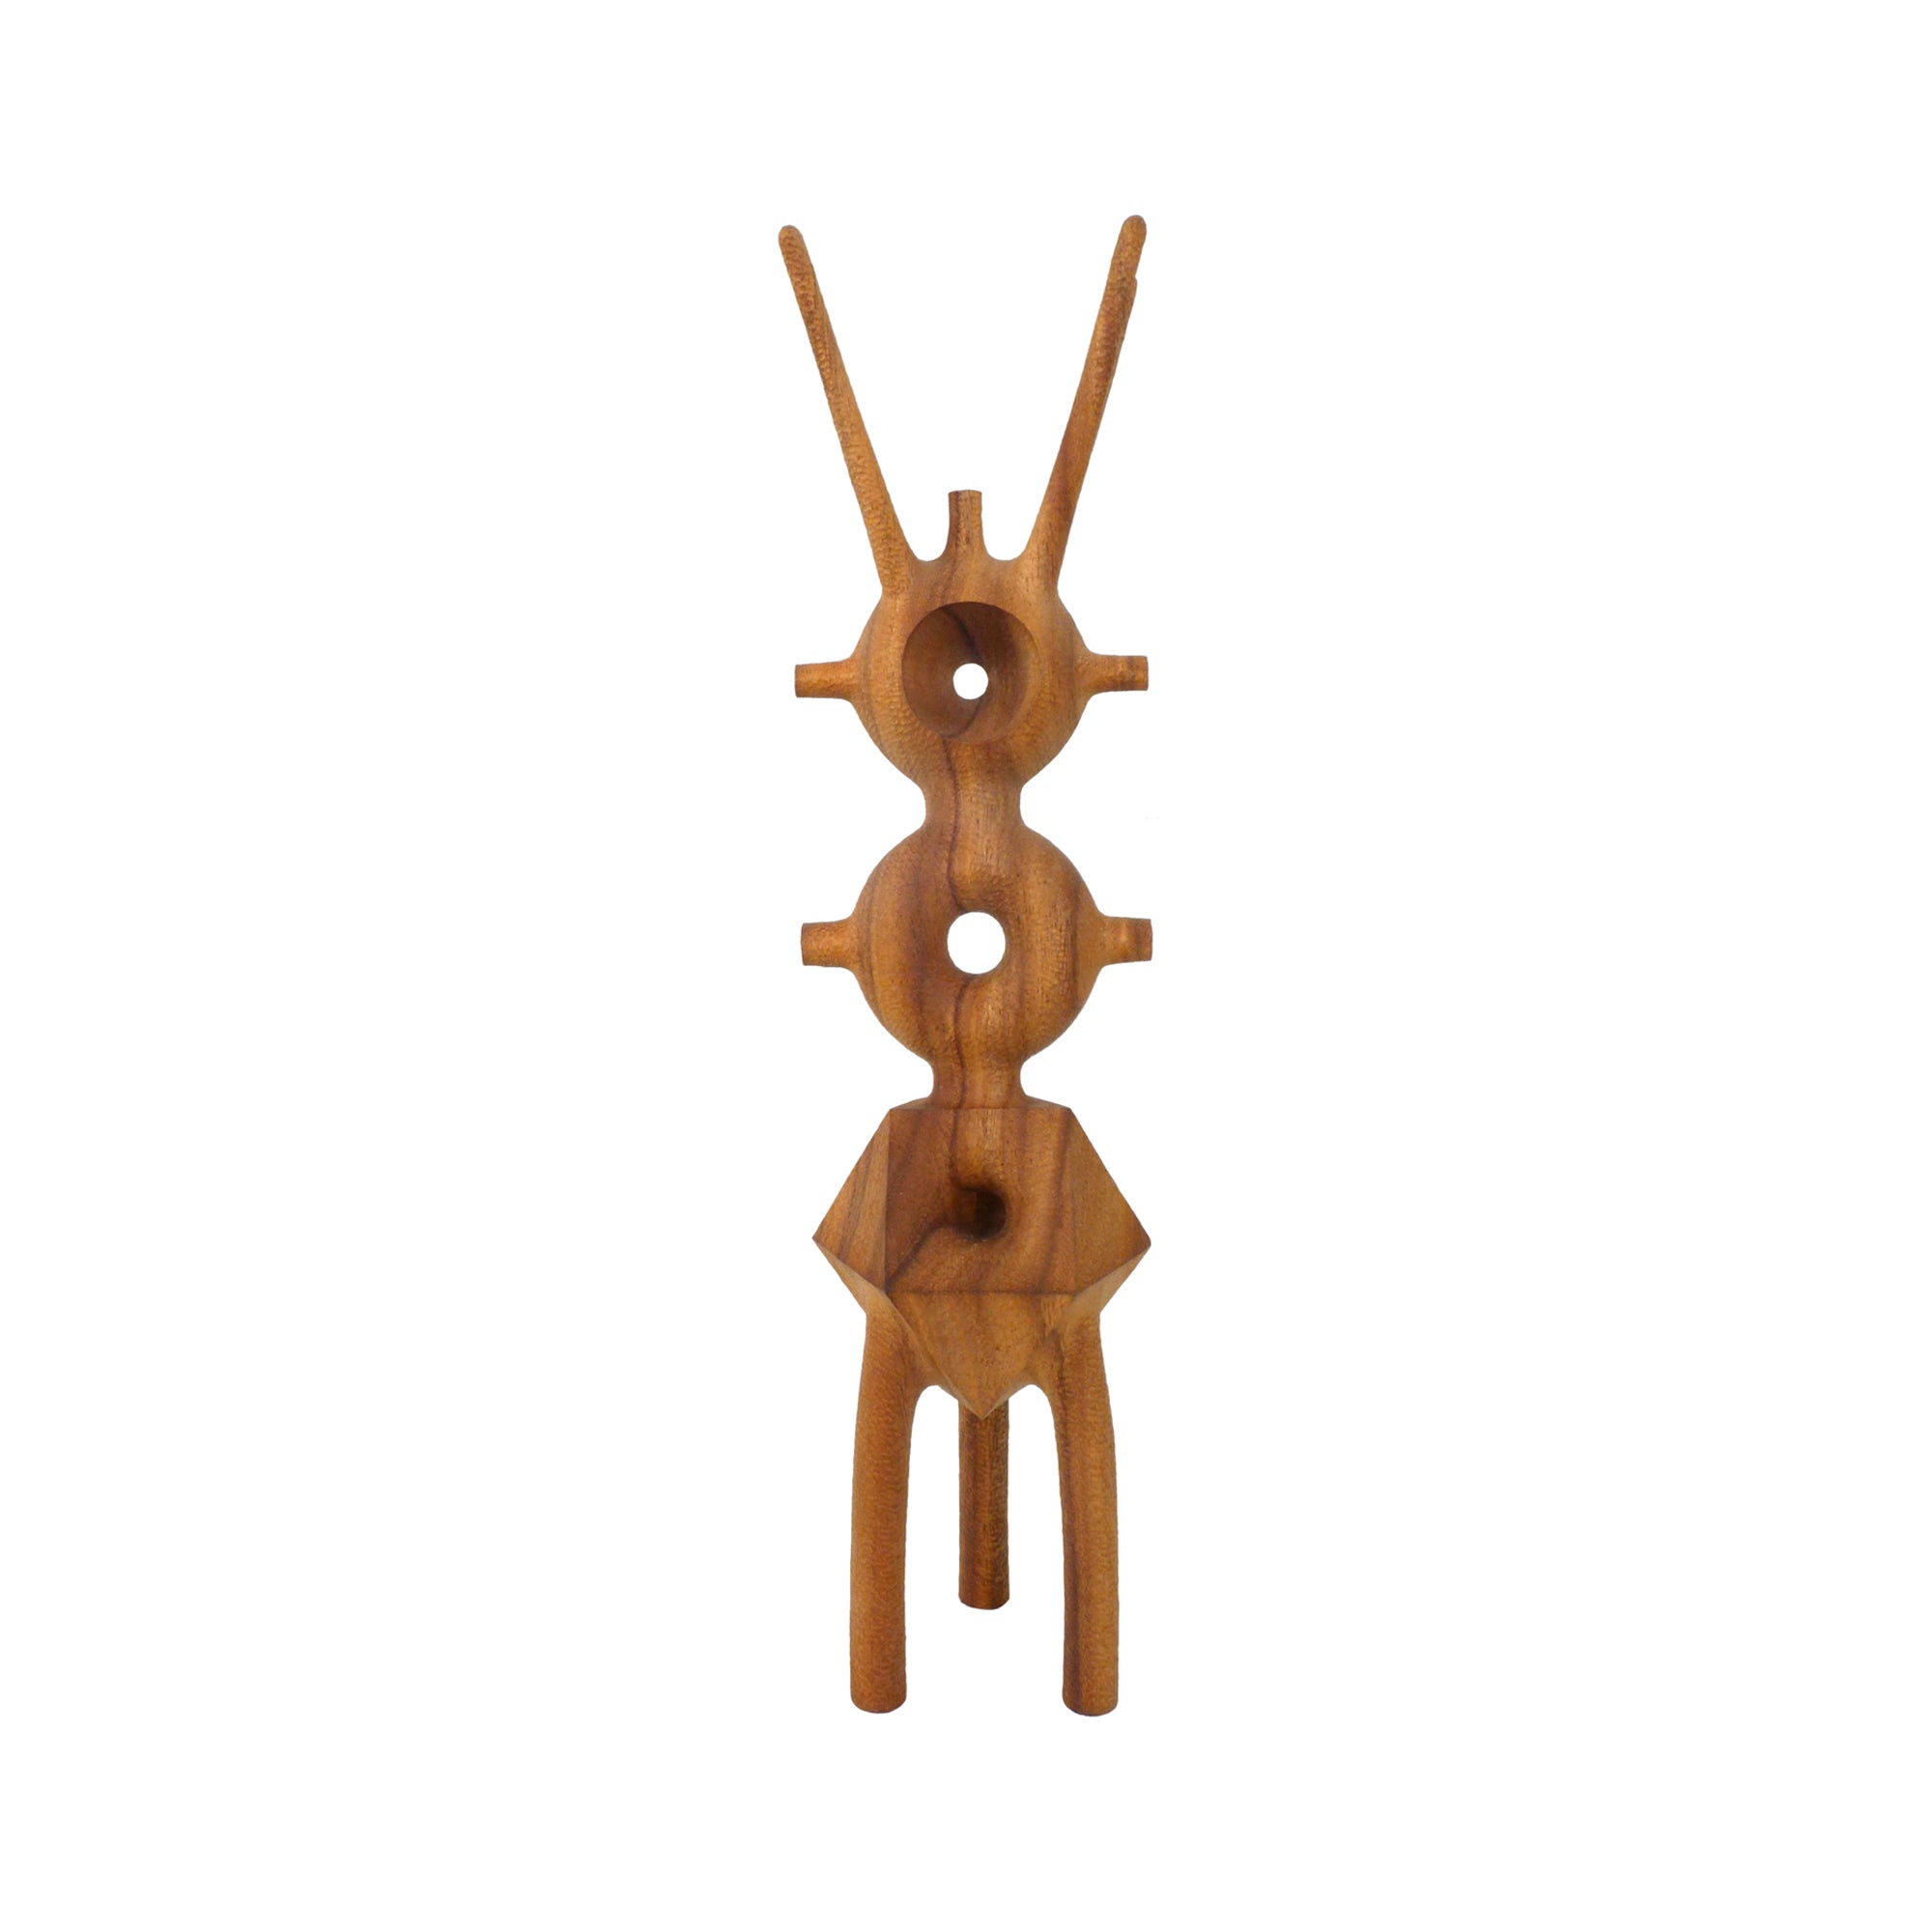 Contemporary 3-Legged Abstract Geometric Carved Wood Sculpture by Aleph Geddis